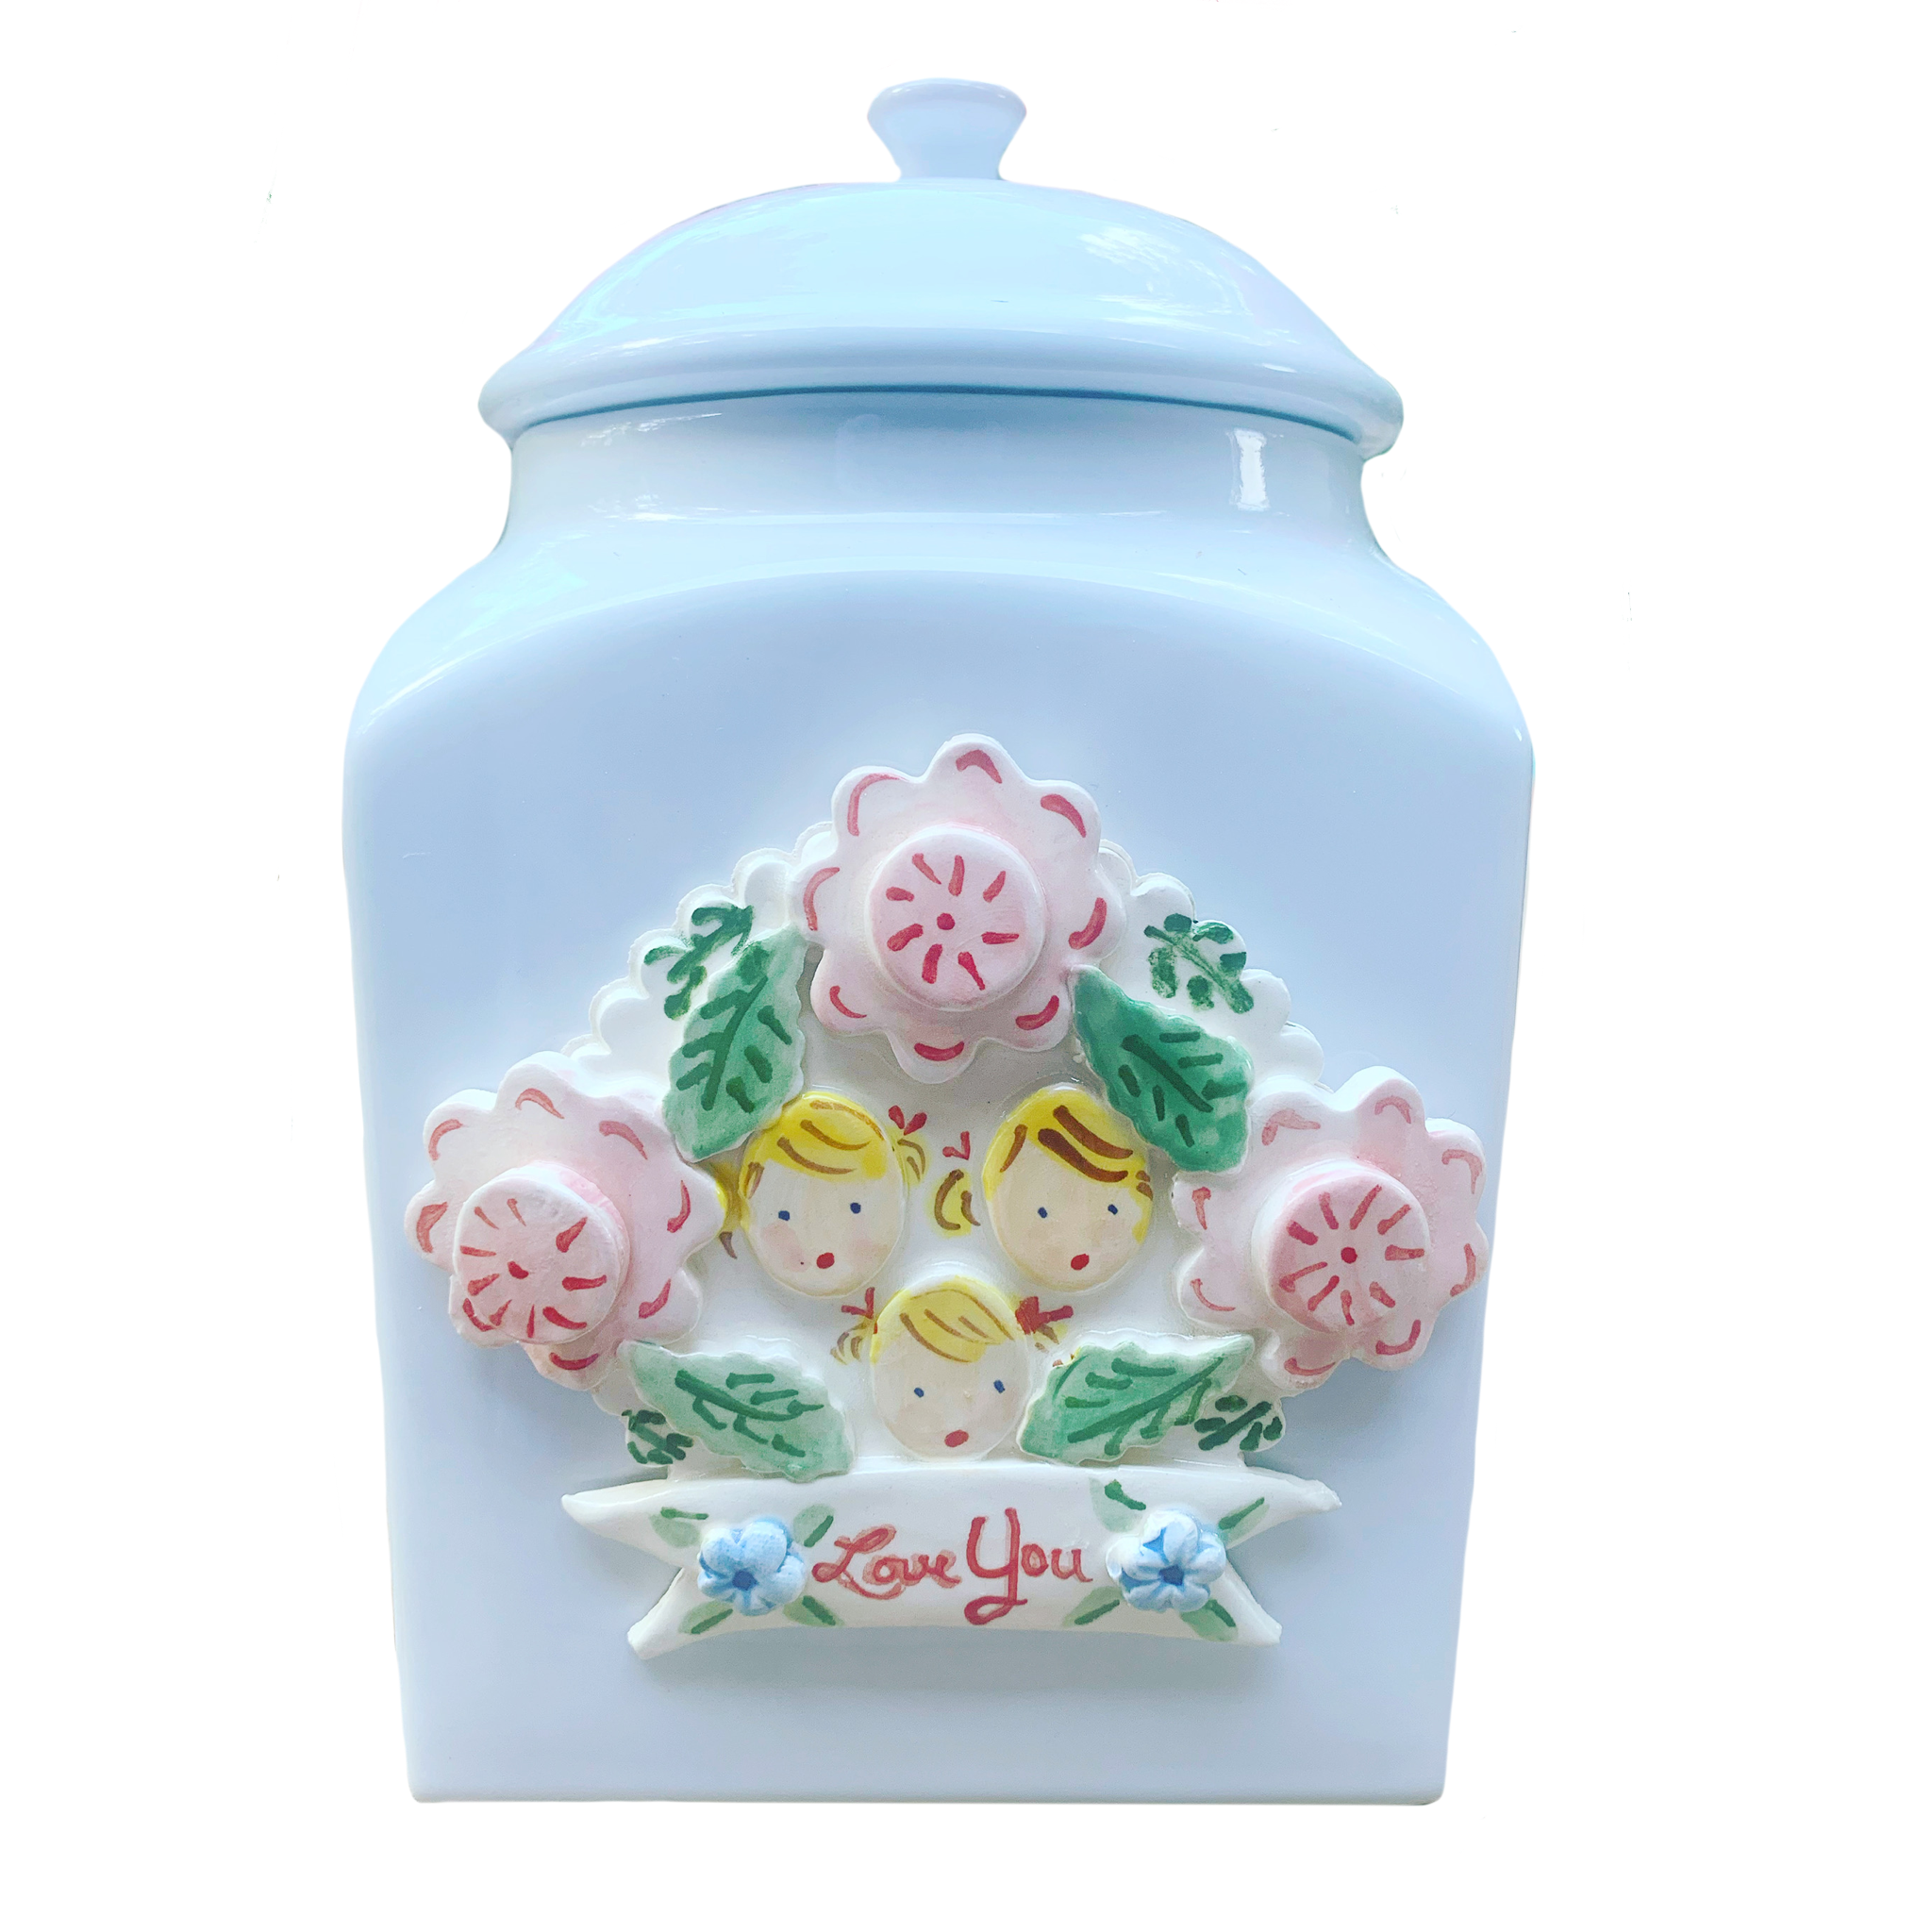 Personalized Cookie Jar - Tricia Lowenfield Design